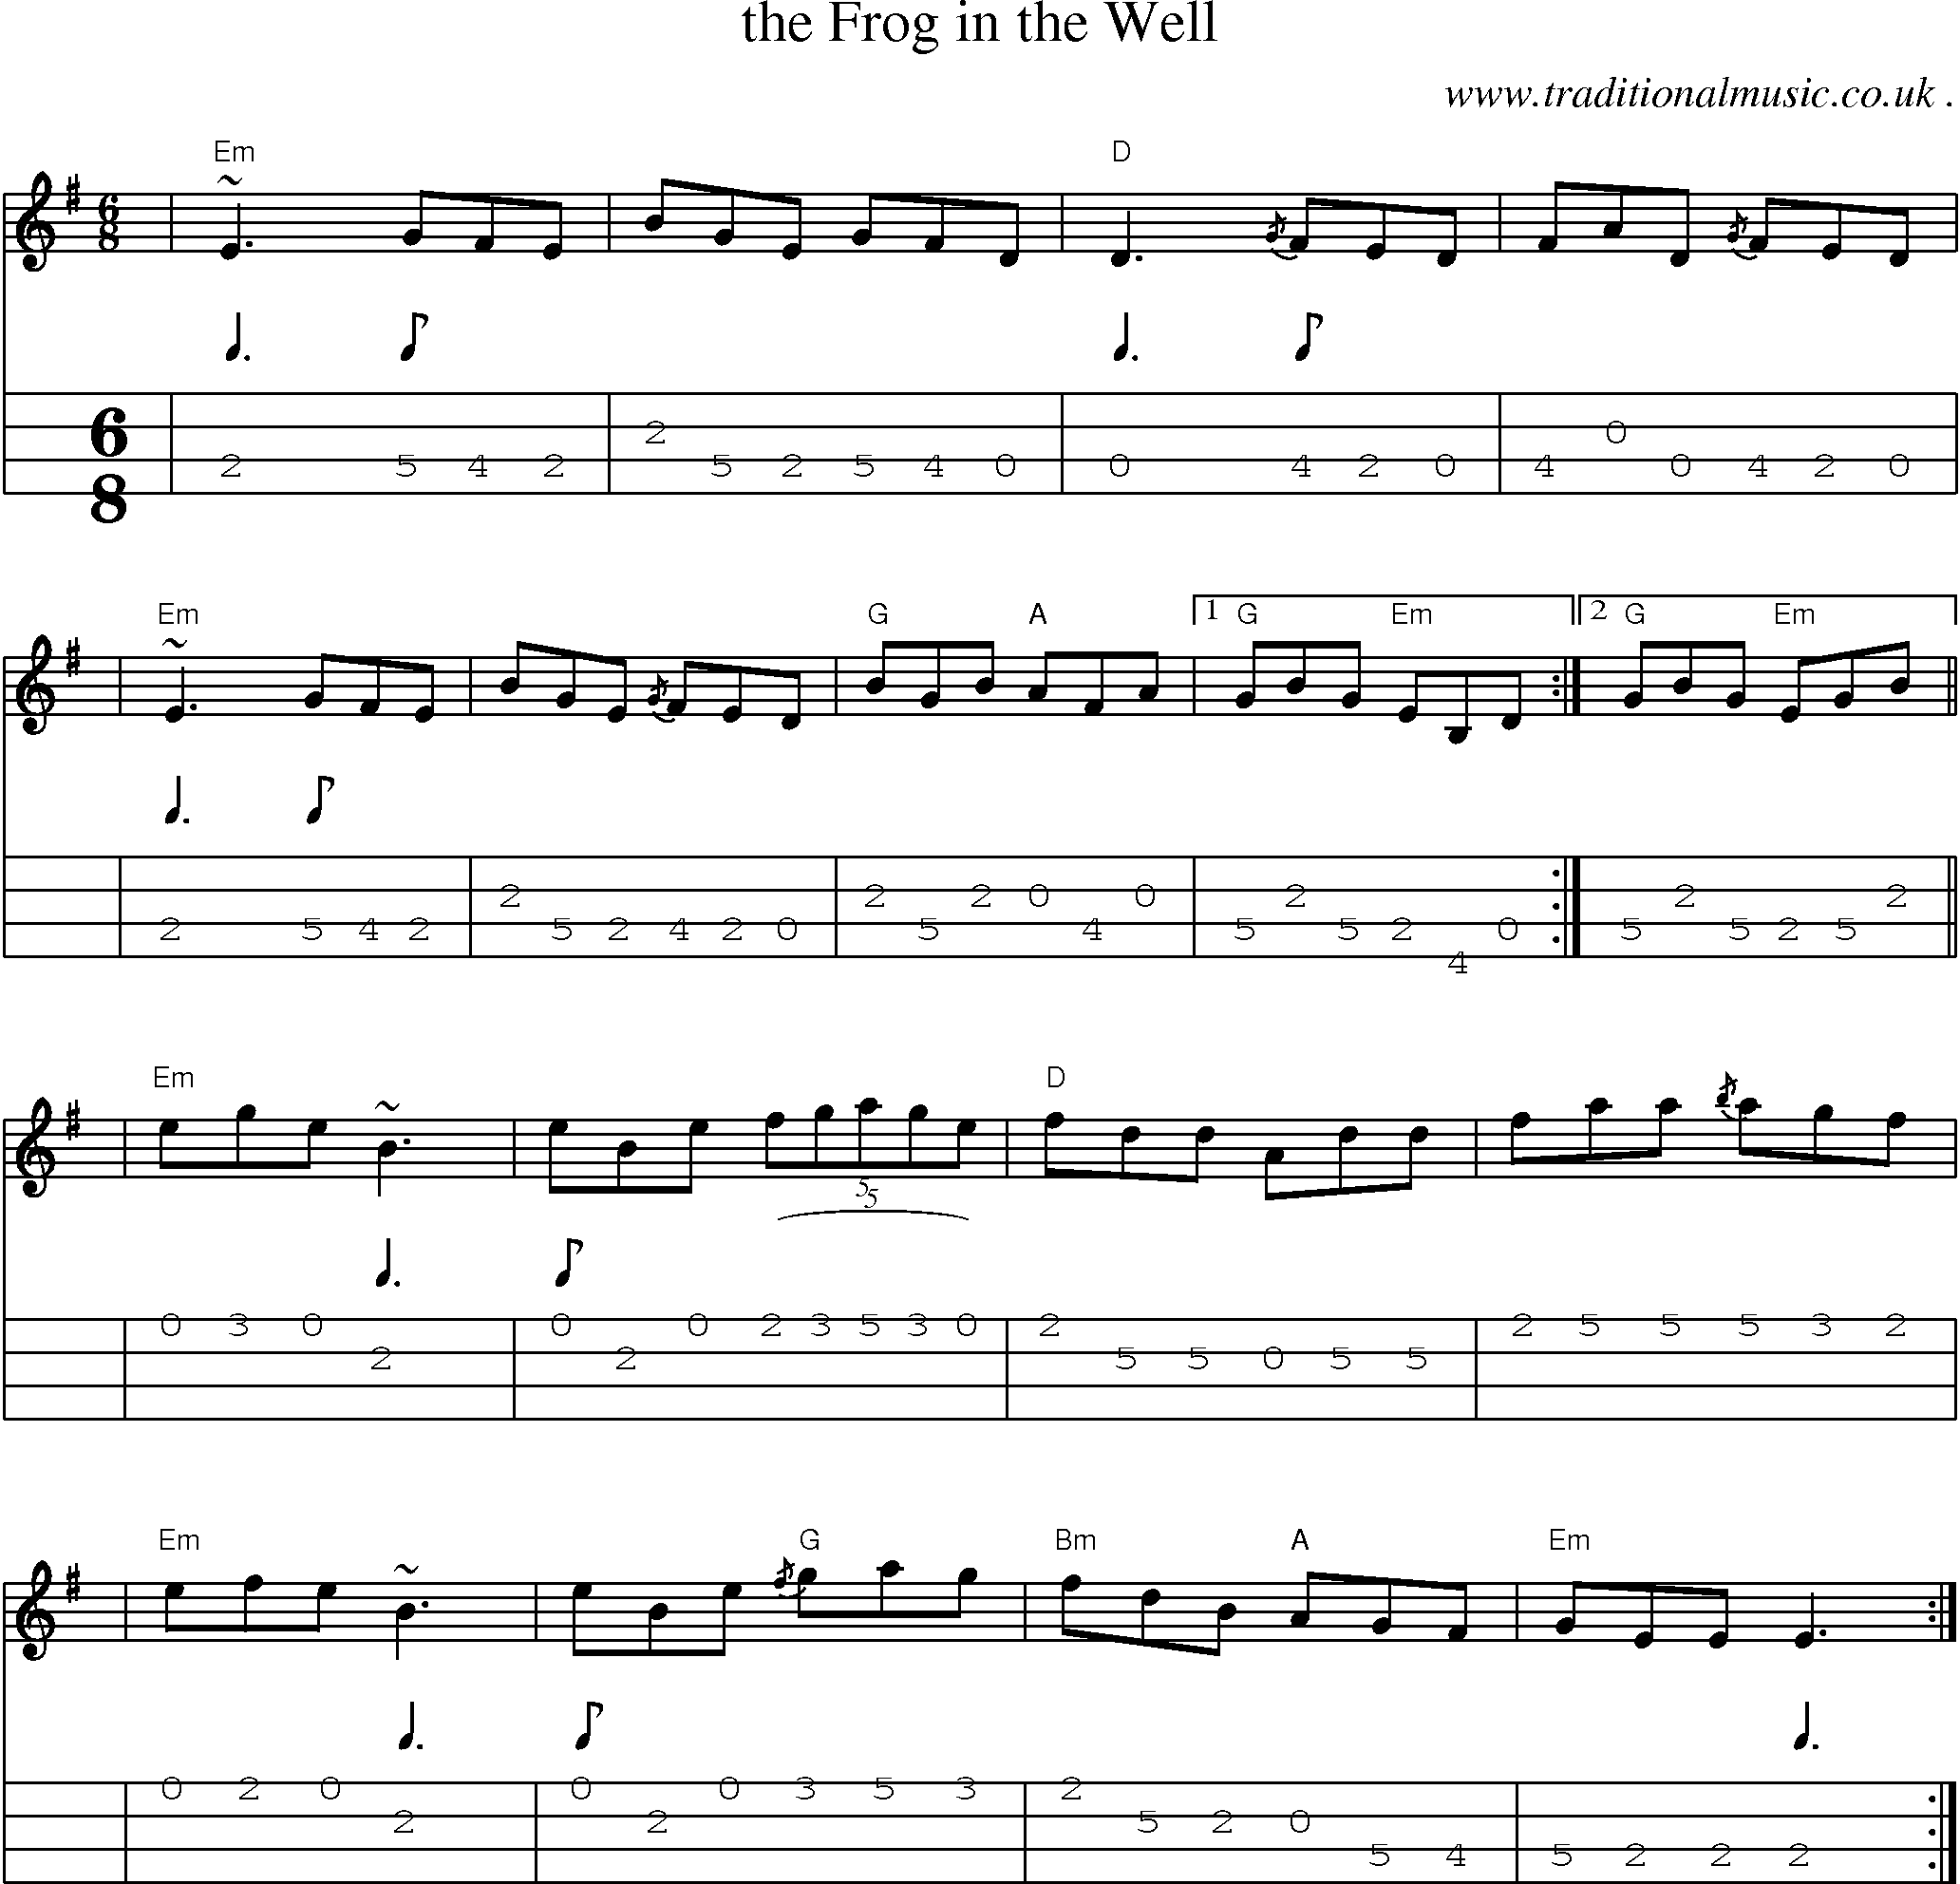 Sheet-music  score, Chords and Mandolin Tabs for The Frog In The Well